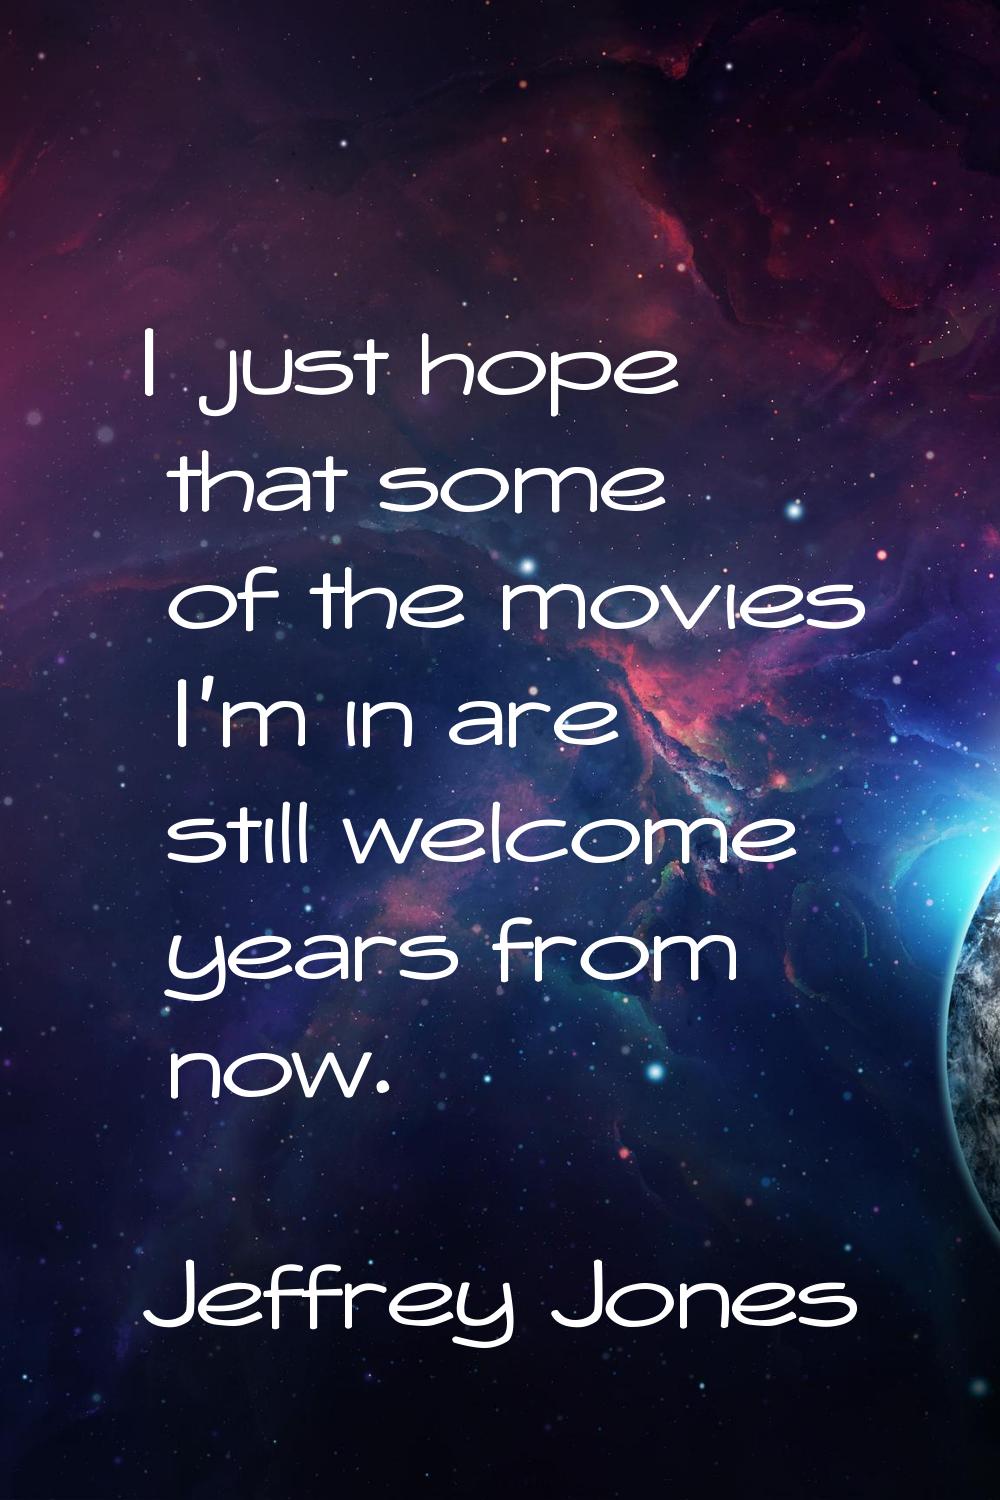 I just hope that some of the movies I'm in are still welcome years from now.